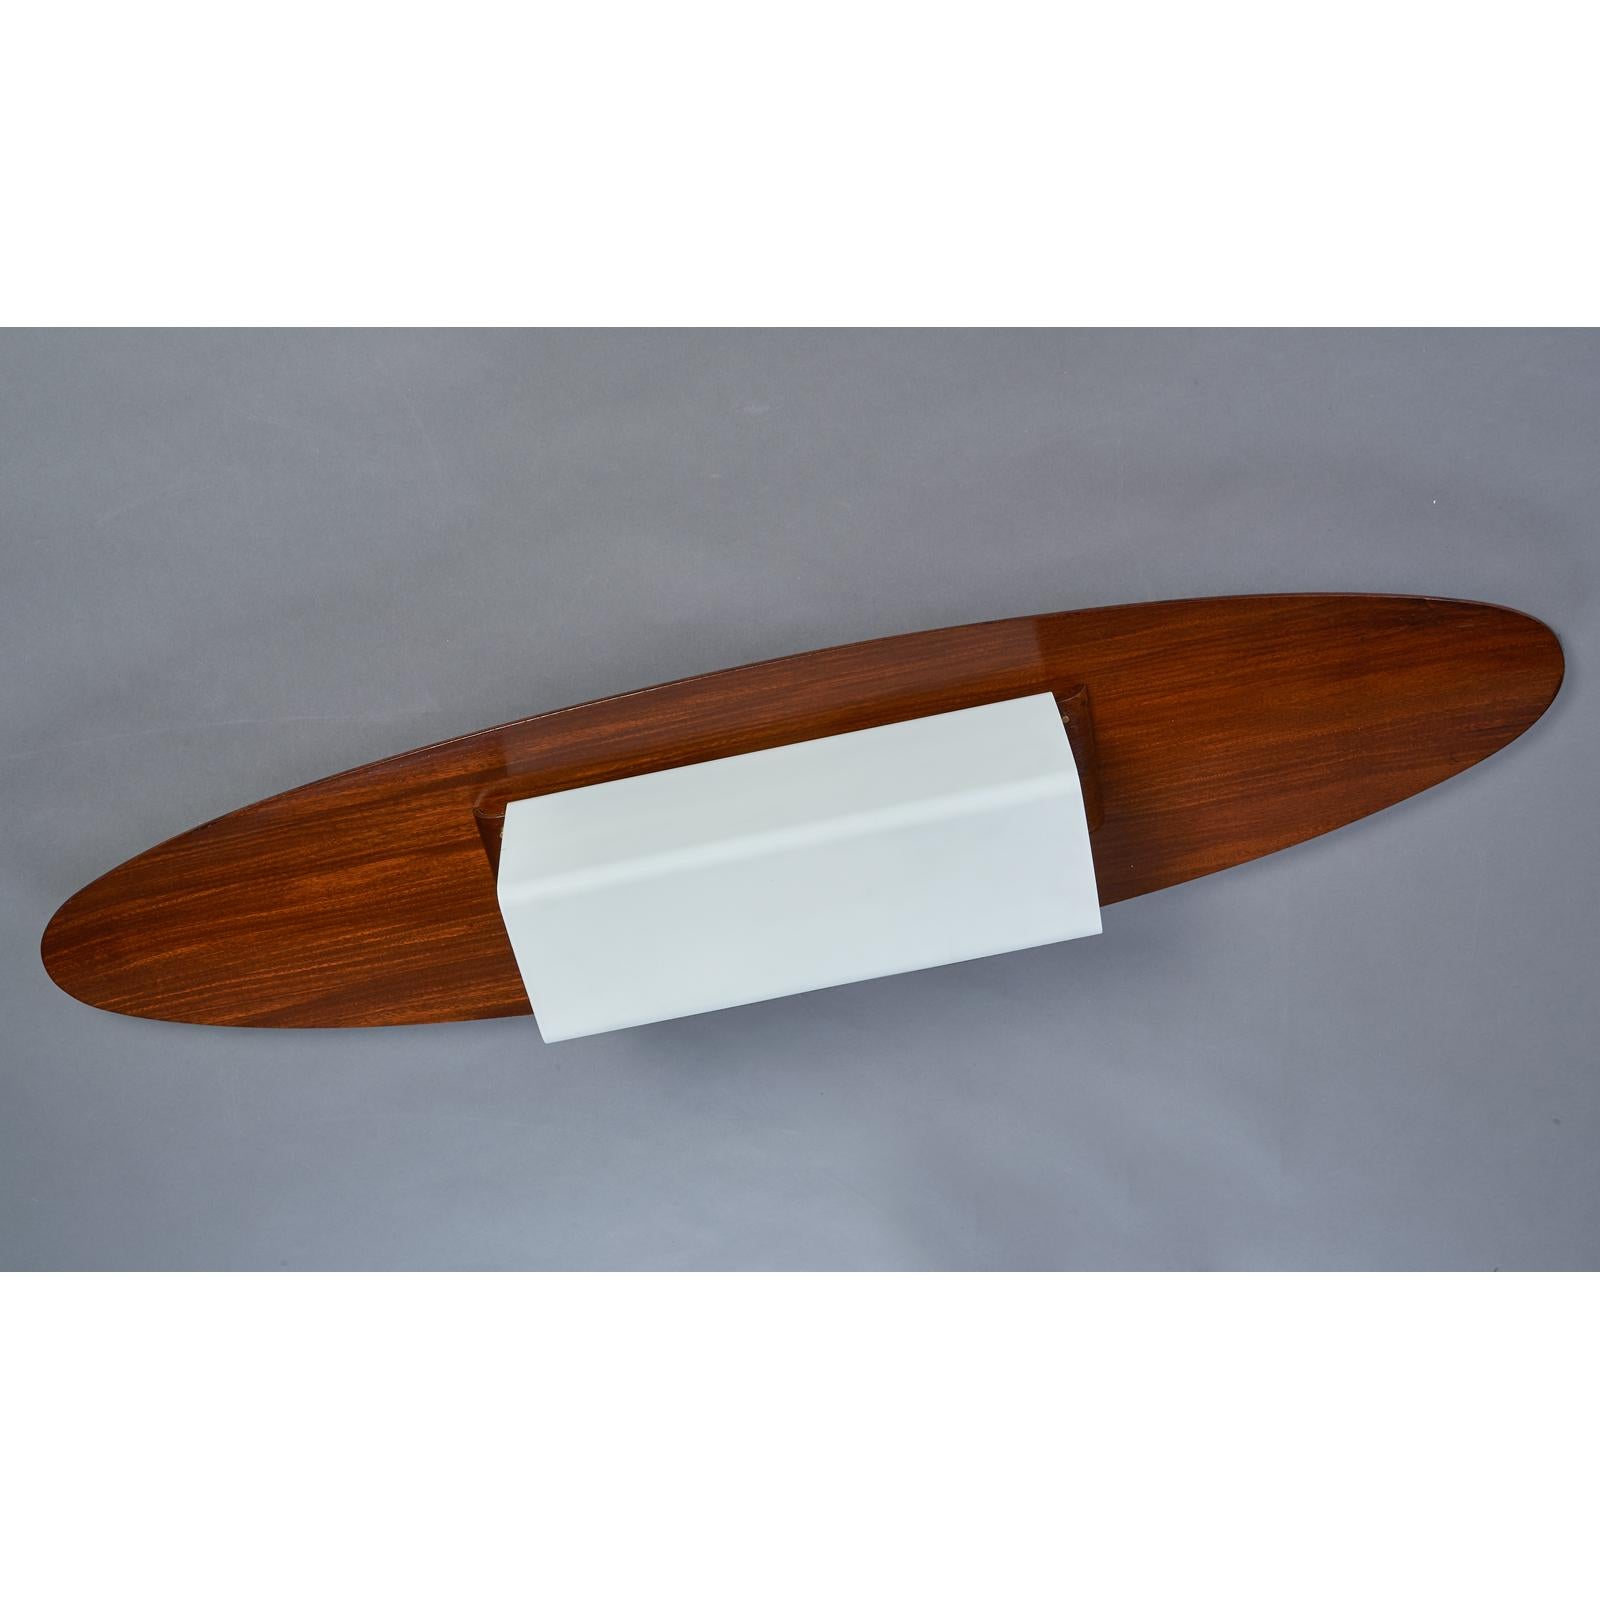 Polished Oval Ceiling Light, Wood and Opaline Glass, Italy 1960s For Sale